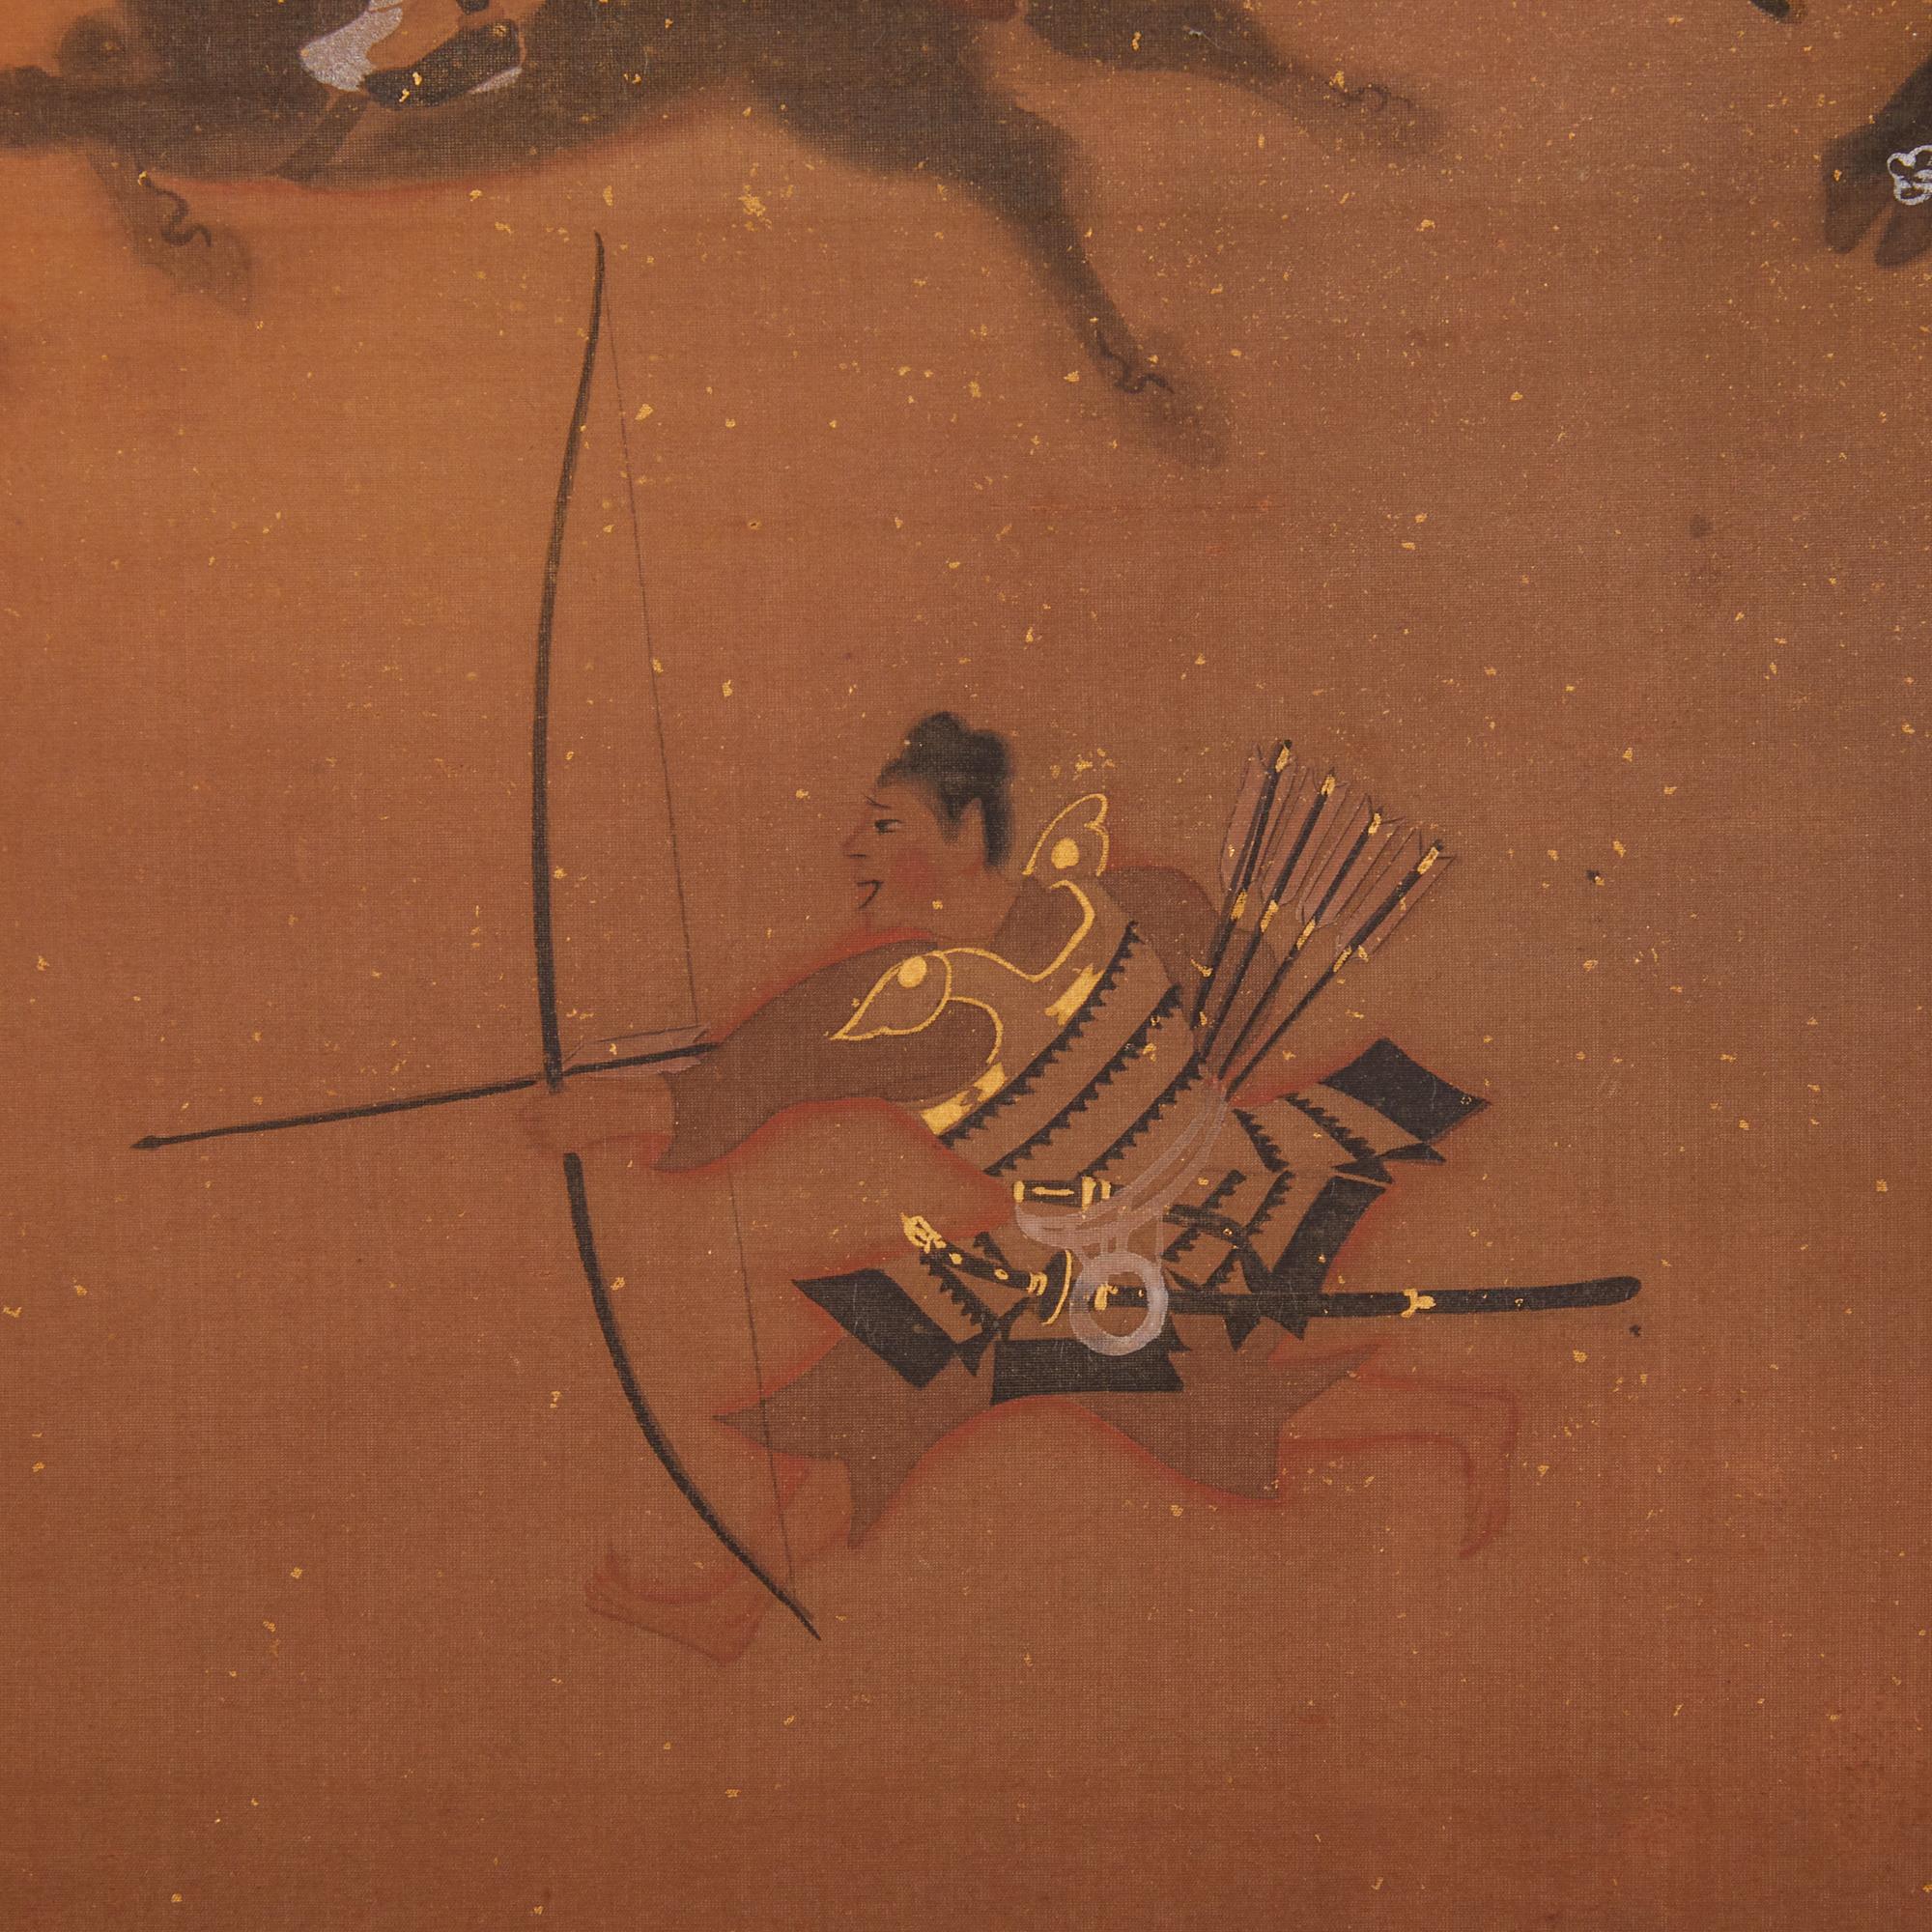 A scene from the 12th century Heike wars. Ruler Taira Shigehira ordered an attack on those who opposed his rule. During the battle, Nanto Temple, in Nara, was burned to the ground. This dramatic scene is beautifully painted with mineral pigment and